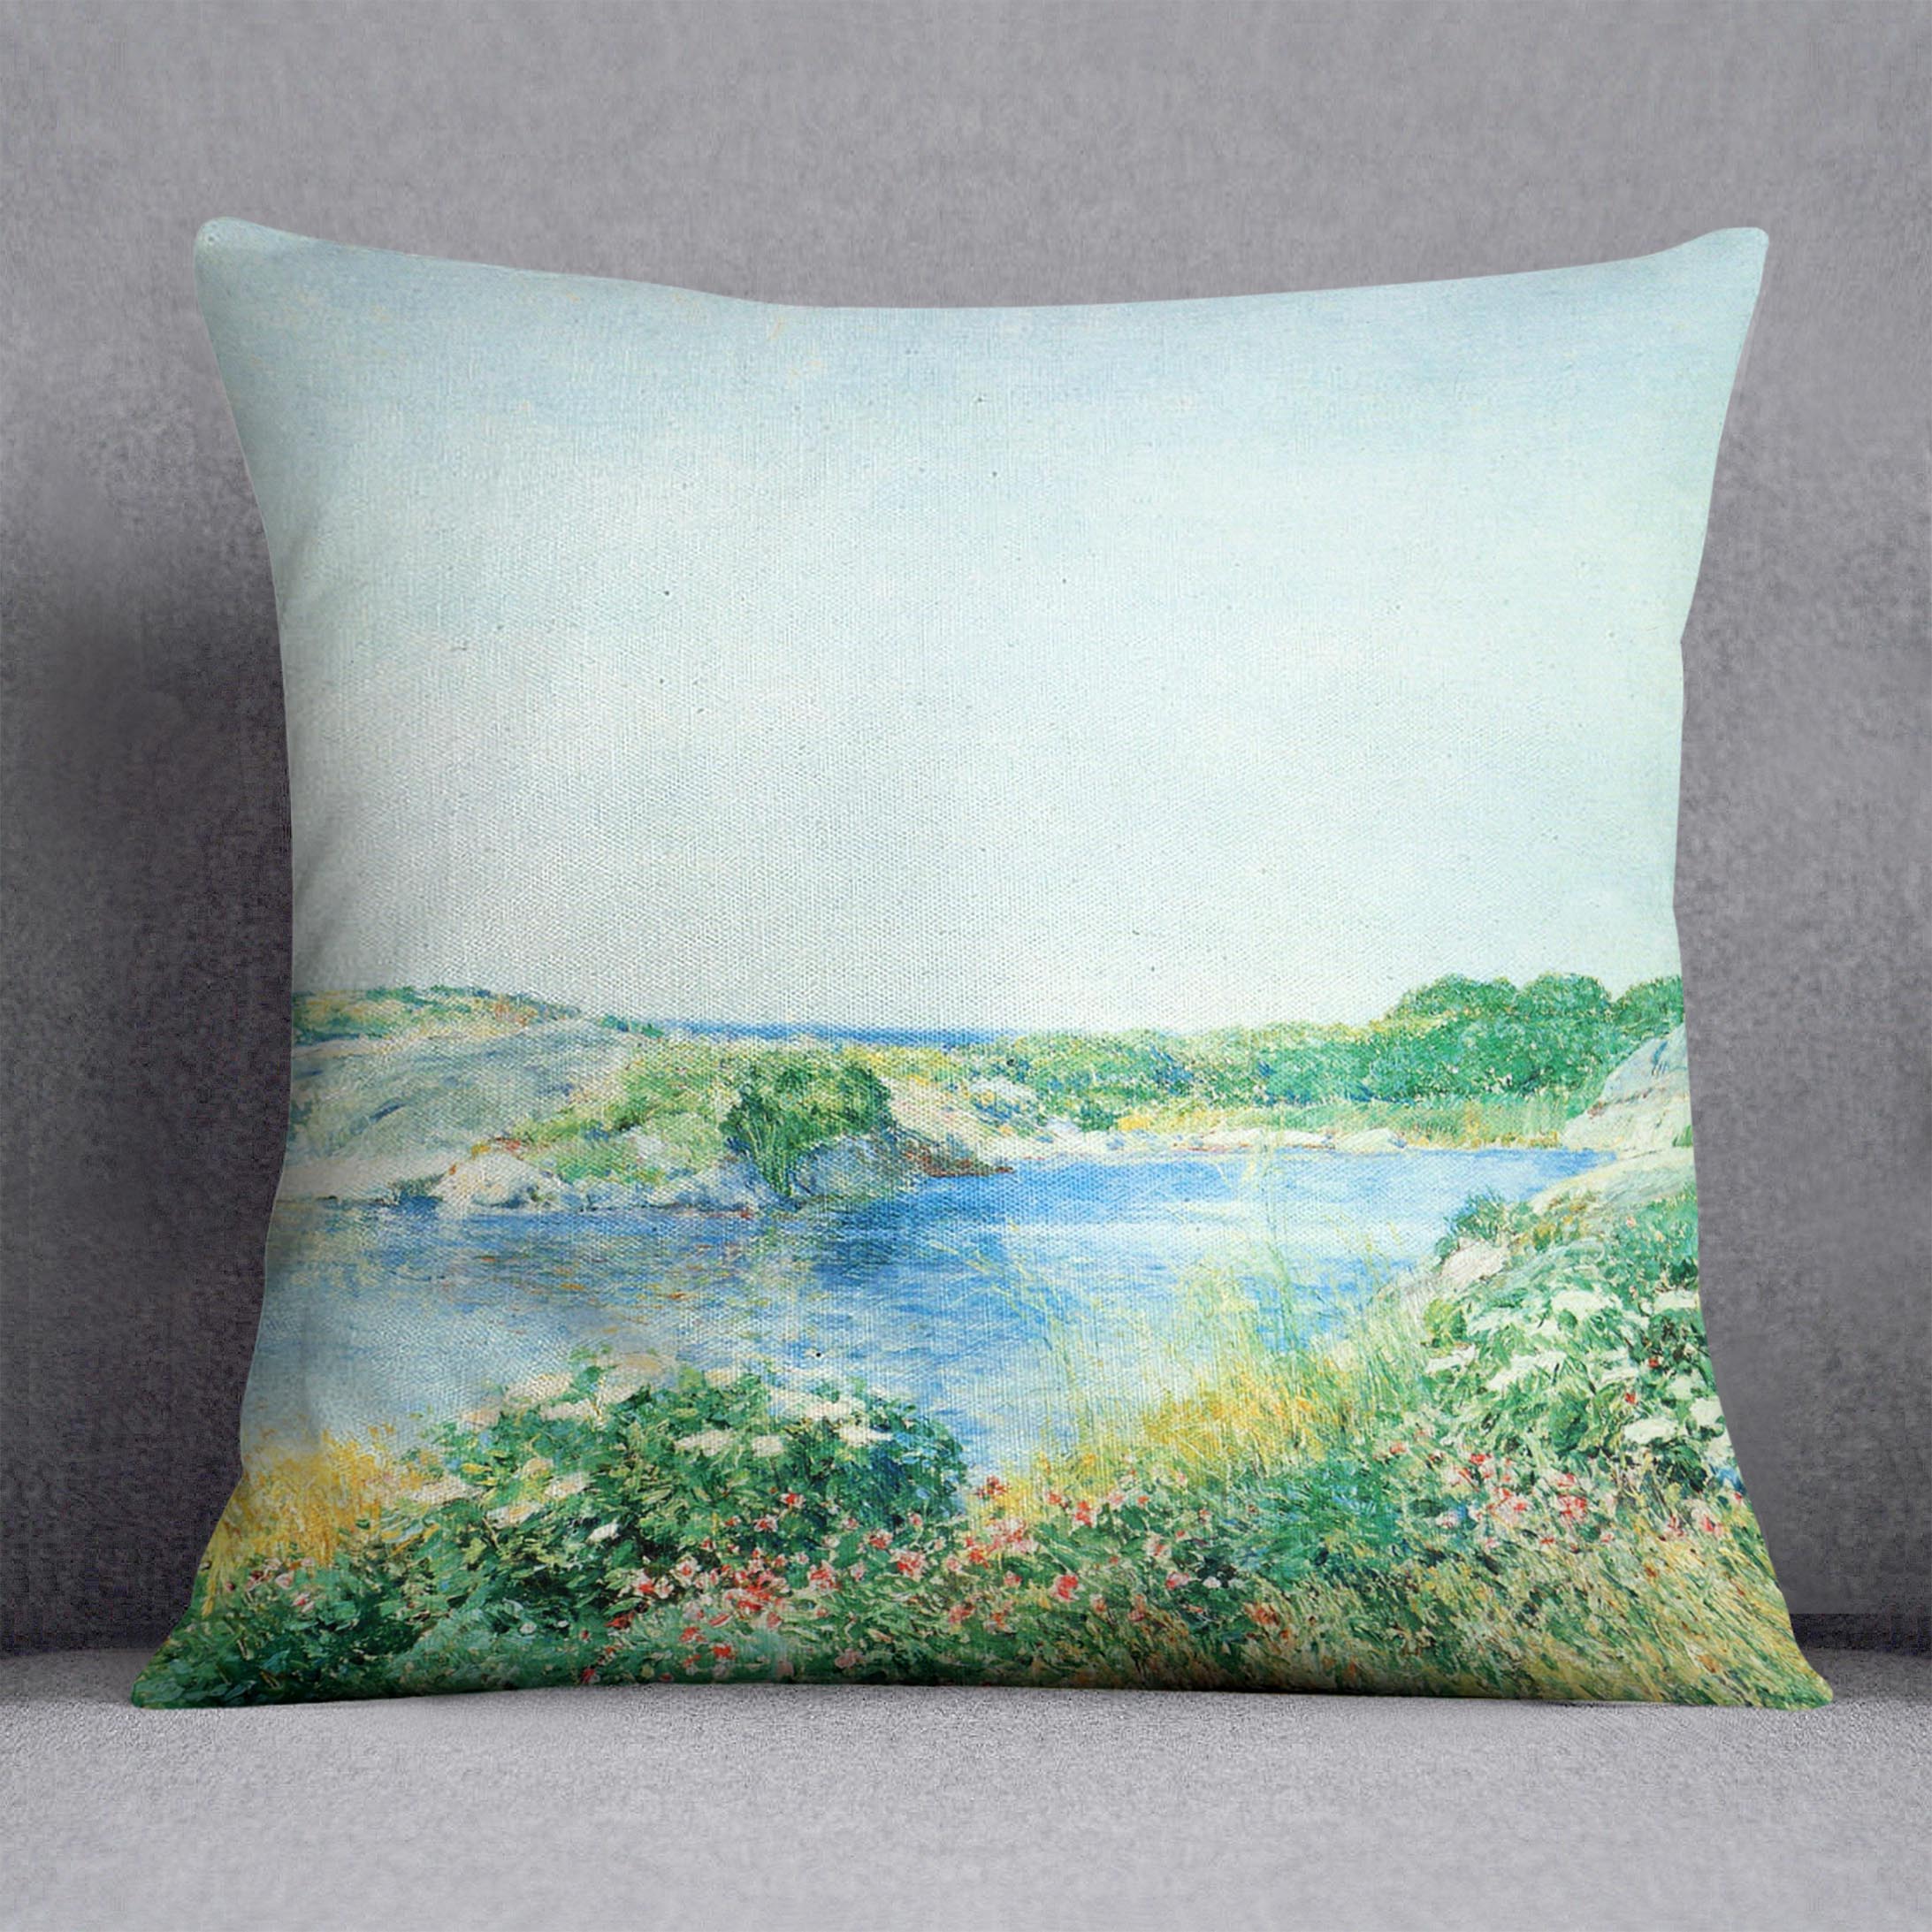 The small pond by Hassam Cushion - Canvas Art Rocks - 1